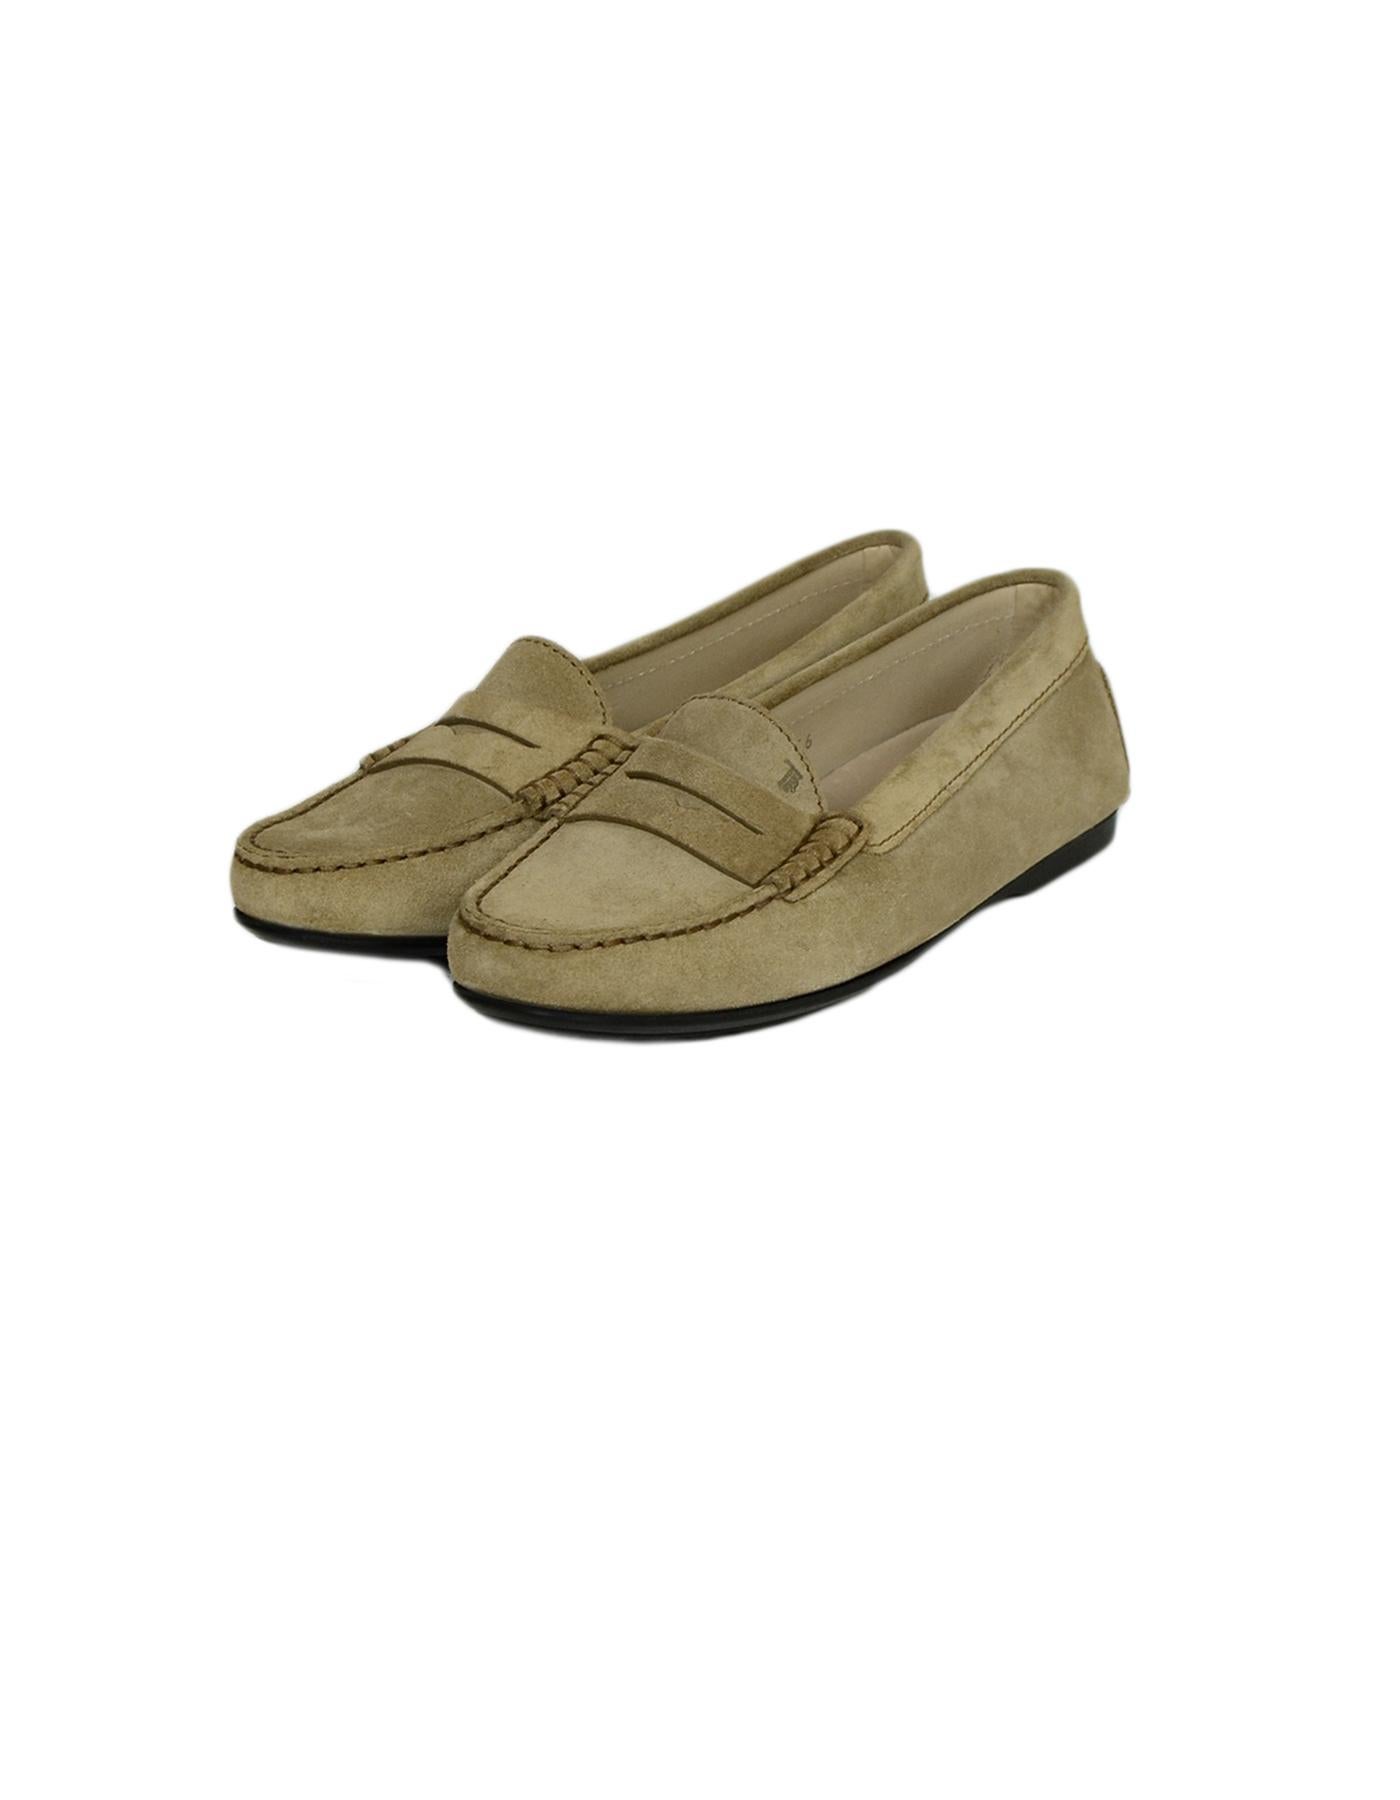 Tods Beige Suede Gommino Driving Loafers 

Made In: Italy
Color: Beige
Materials: Suede
Closure/Opening: Slip-on
Overall Condition: Excellent pre-owned condition, with the exception of color transfer on insoles 
Estimated Retail: $425 +